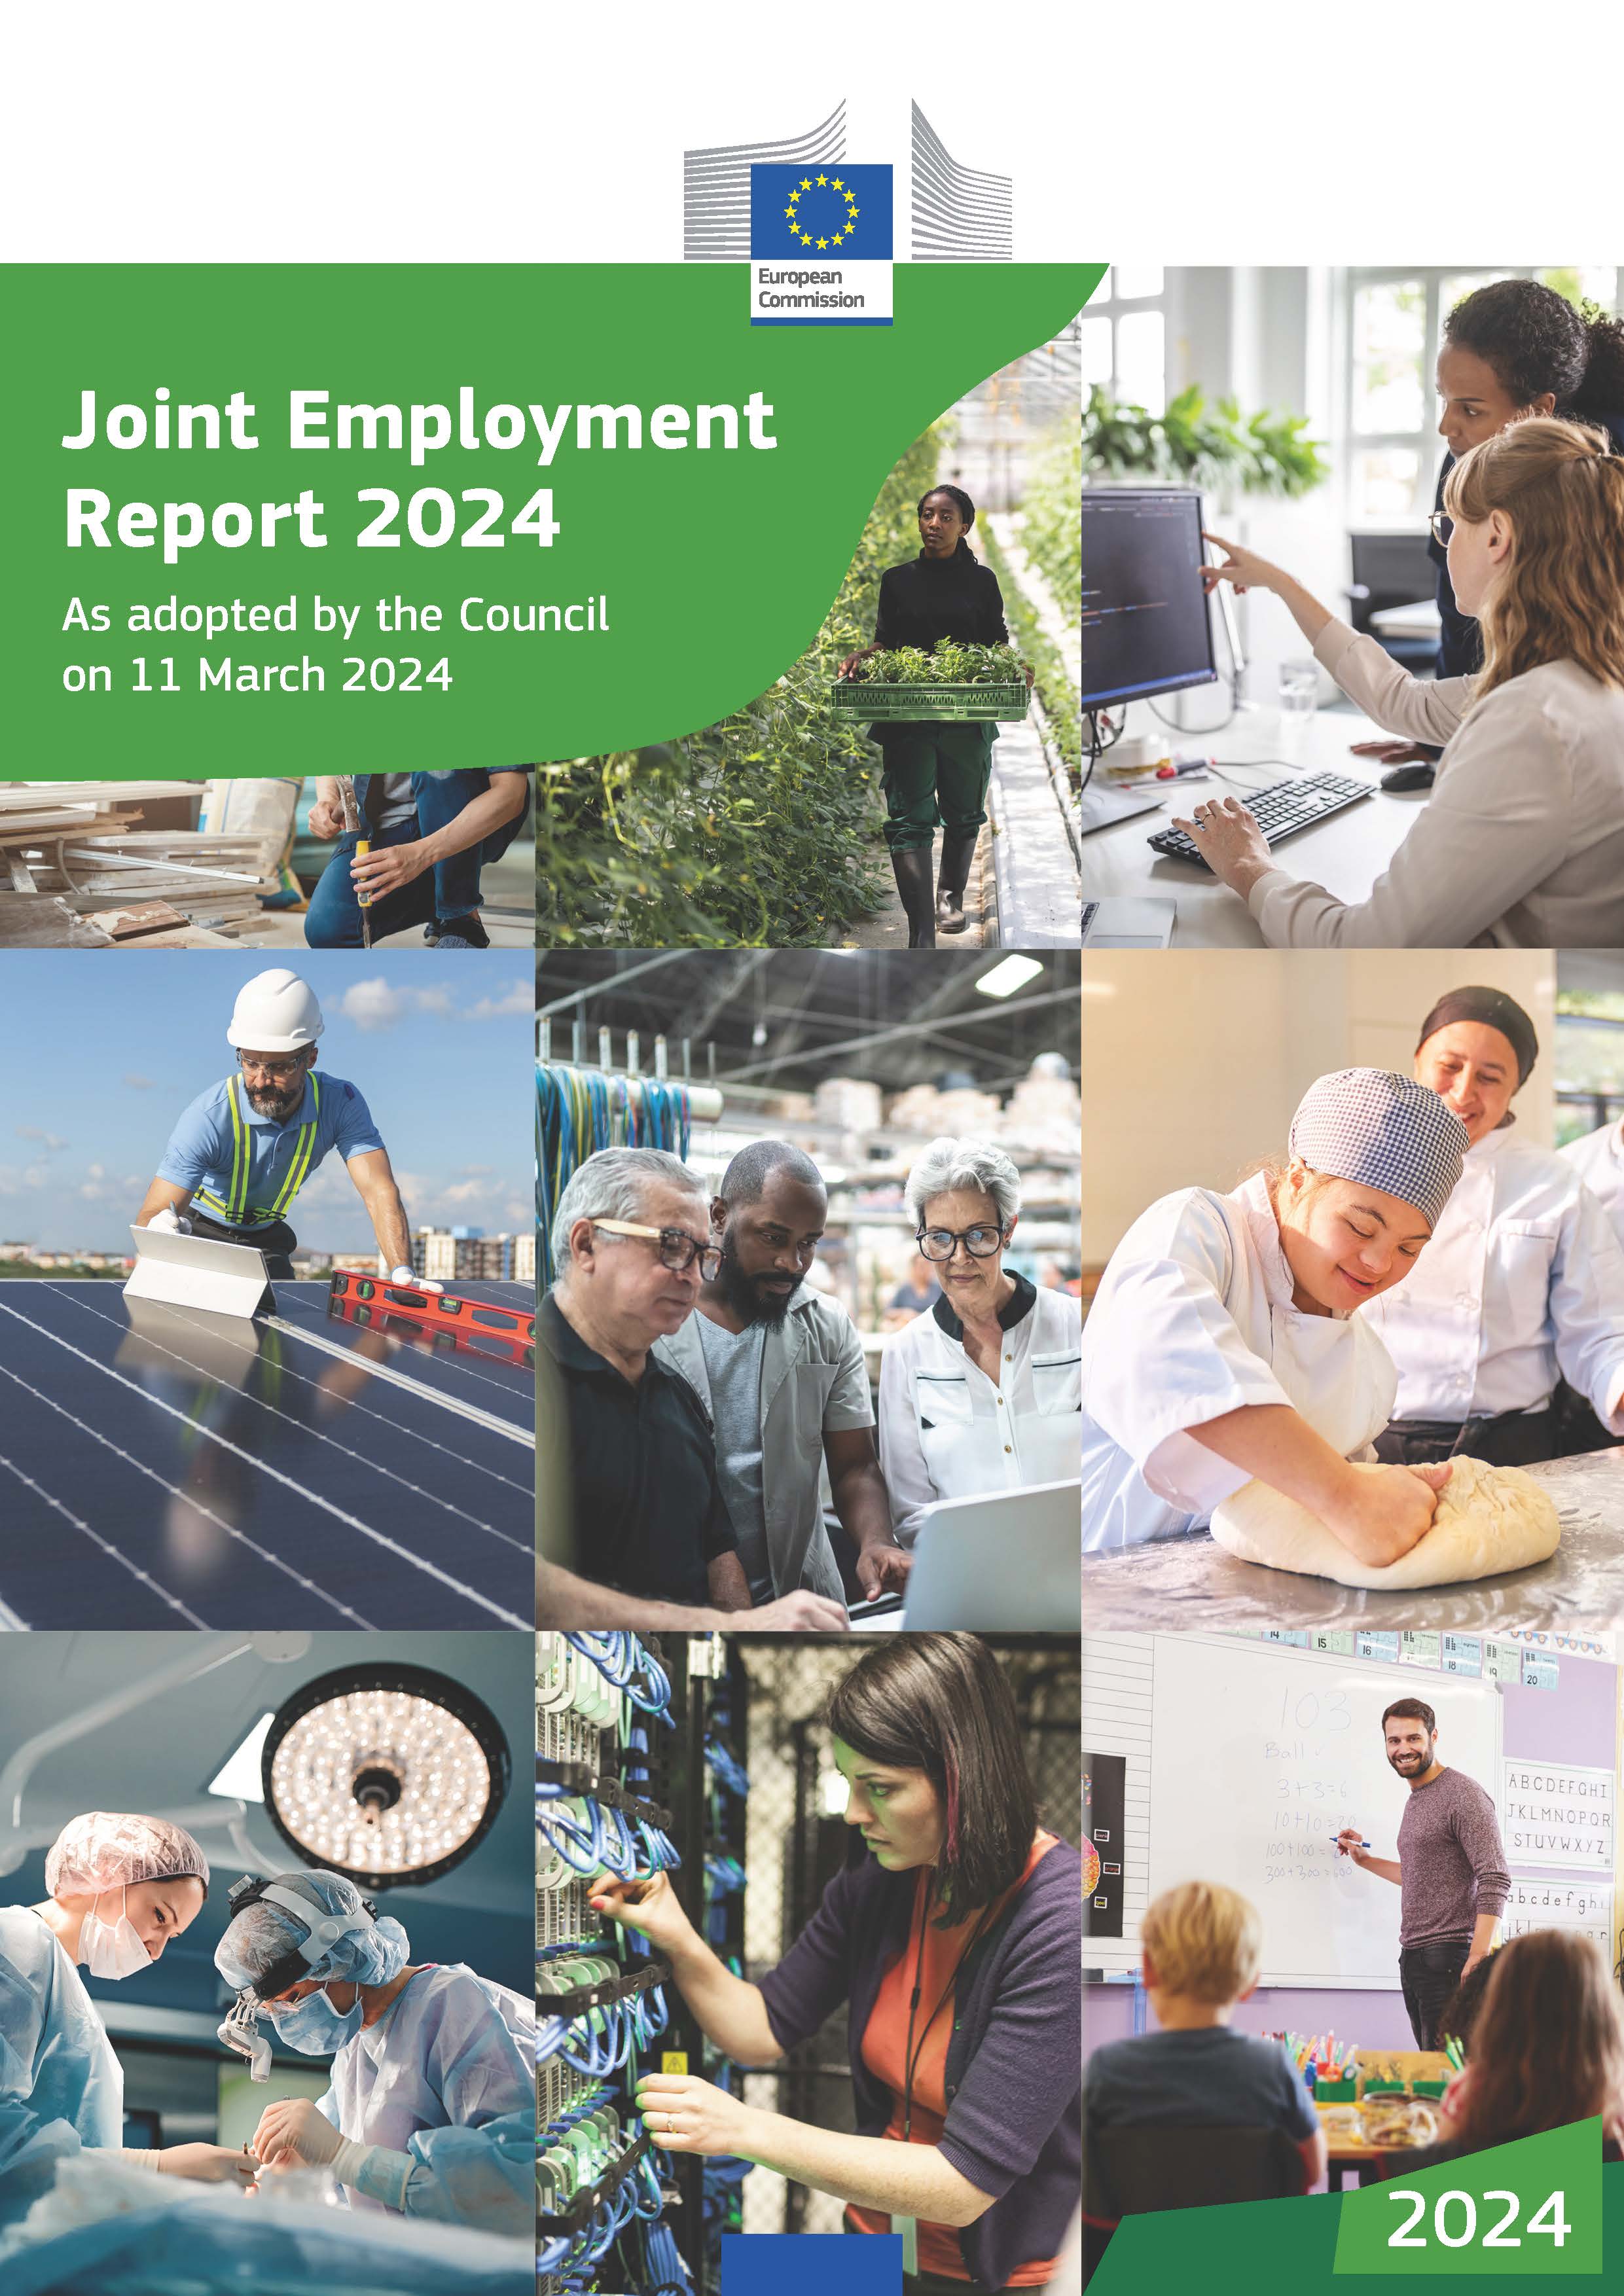 Joint Employment Report 2024
As adopted by the Council on 11 March 2024